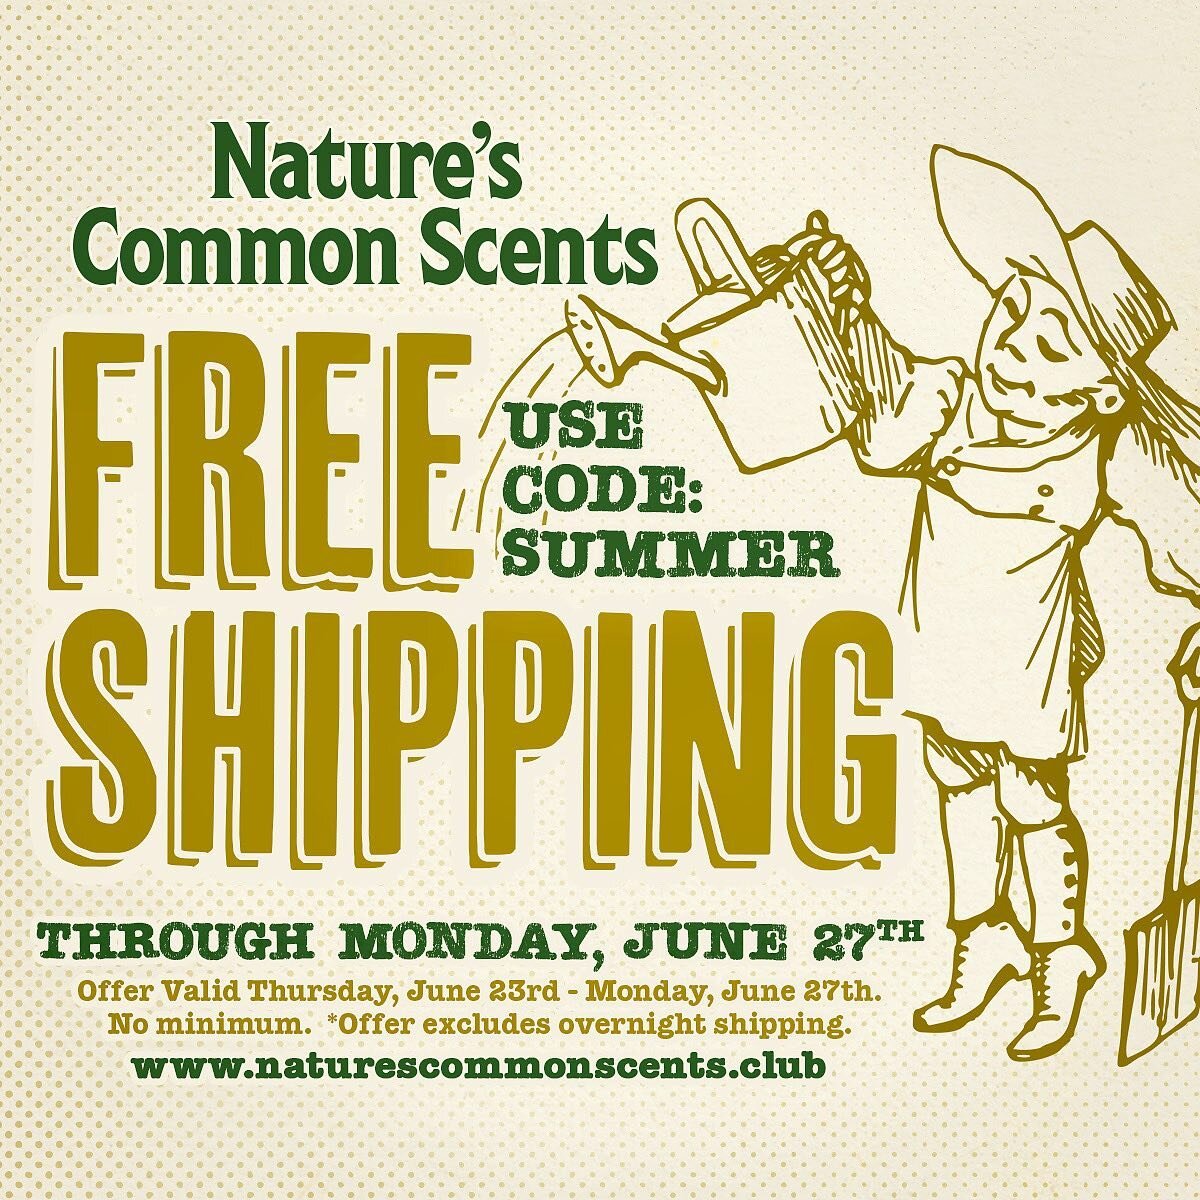 Stock up for summertime with Therapy Bars, Balms, and Natural Insect Repellents during&nbsp;our&nbsp;June FREE SHIPPING offer!
Use code: SUMMER at checkout&nbsp;through Monday, June&nbsp;27th.

www.naturescommonscents.club